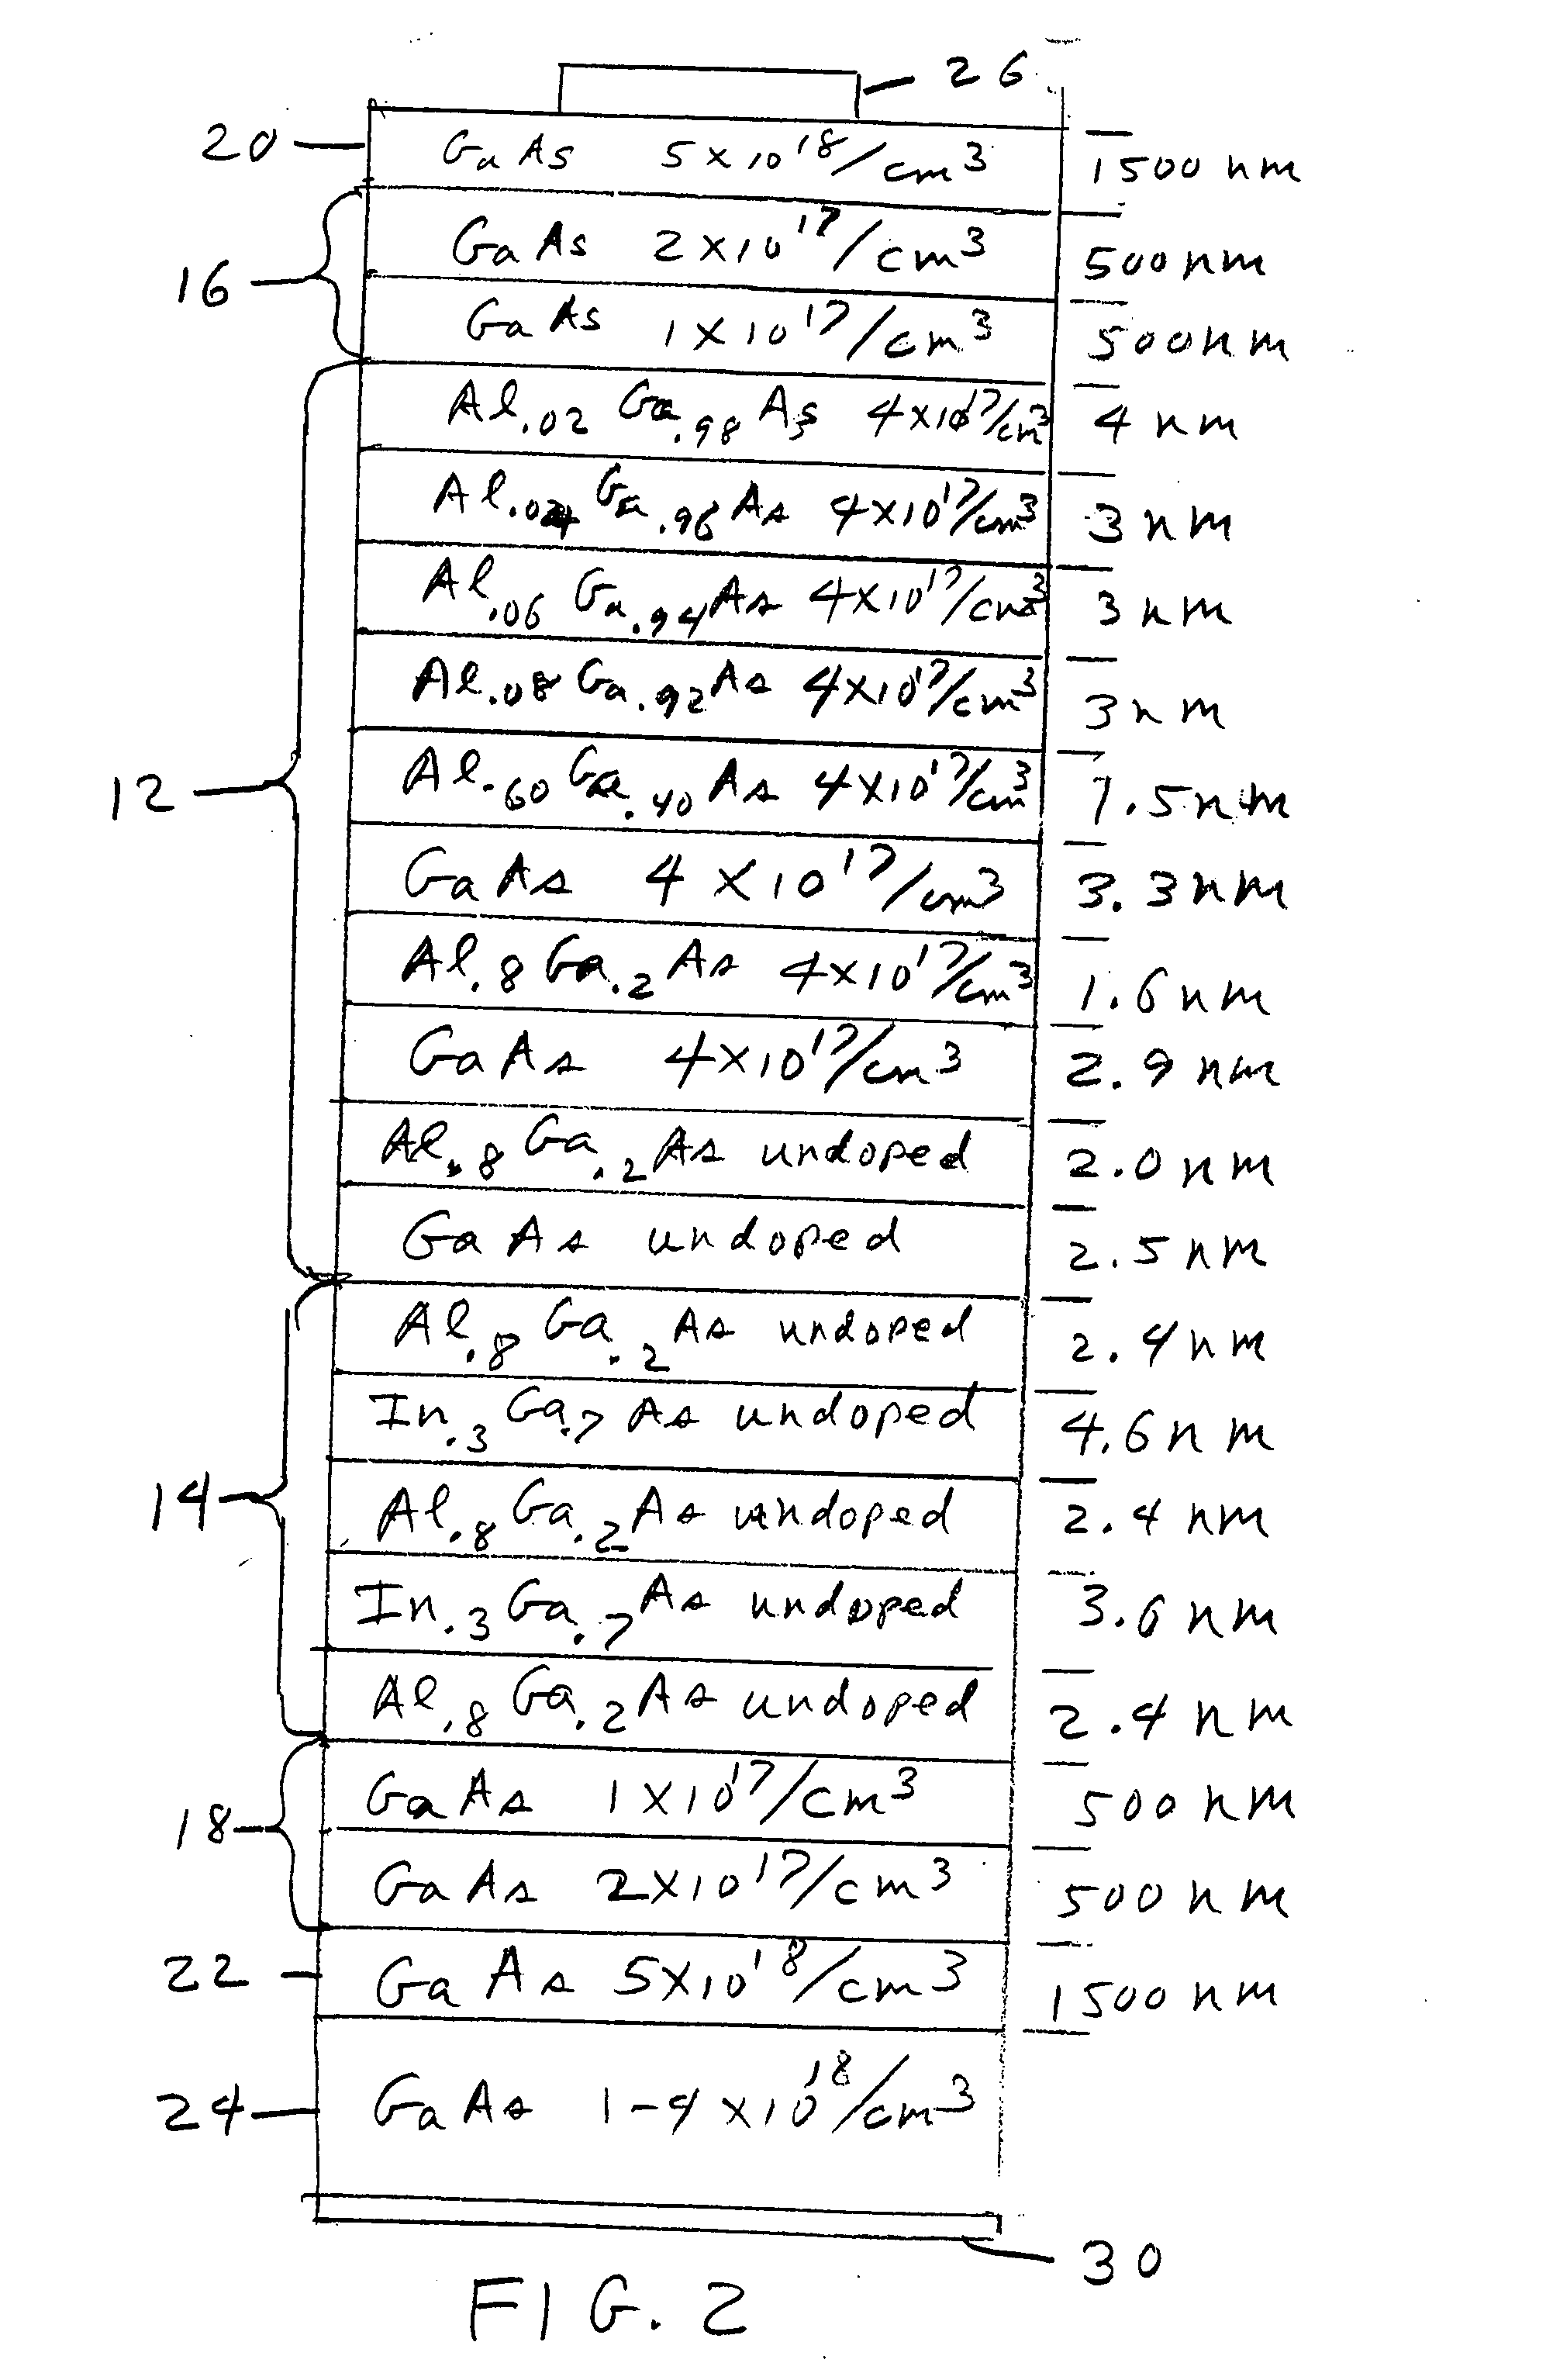 Intersubband mid-infrared electroluminescent semiconductor devices